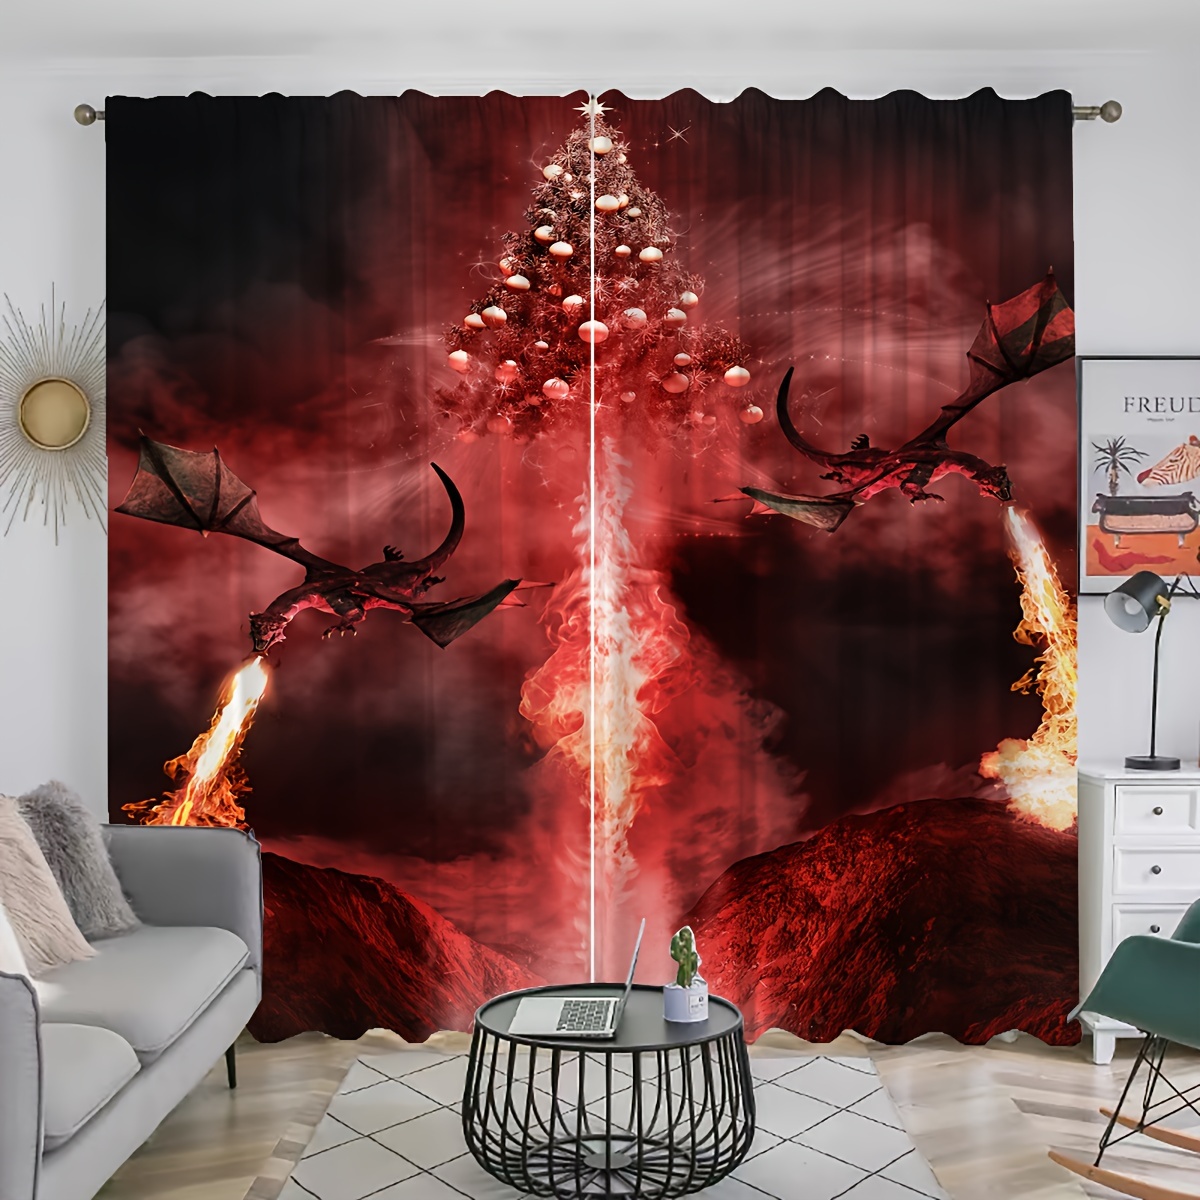 

2pcs, Dragon Printed Curtains, Rod Pocket Curtain, Suitable For Restaurants, Public Places, Living Rooms, Bedrooms, Offices, Study Rooms, Home Decoration